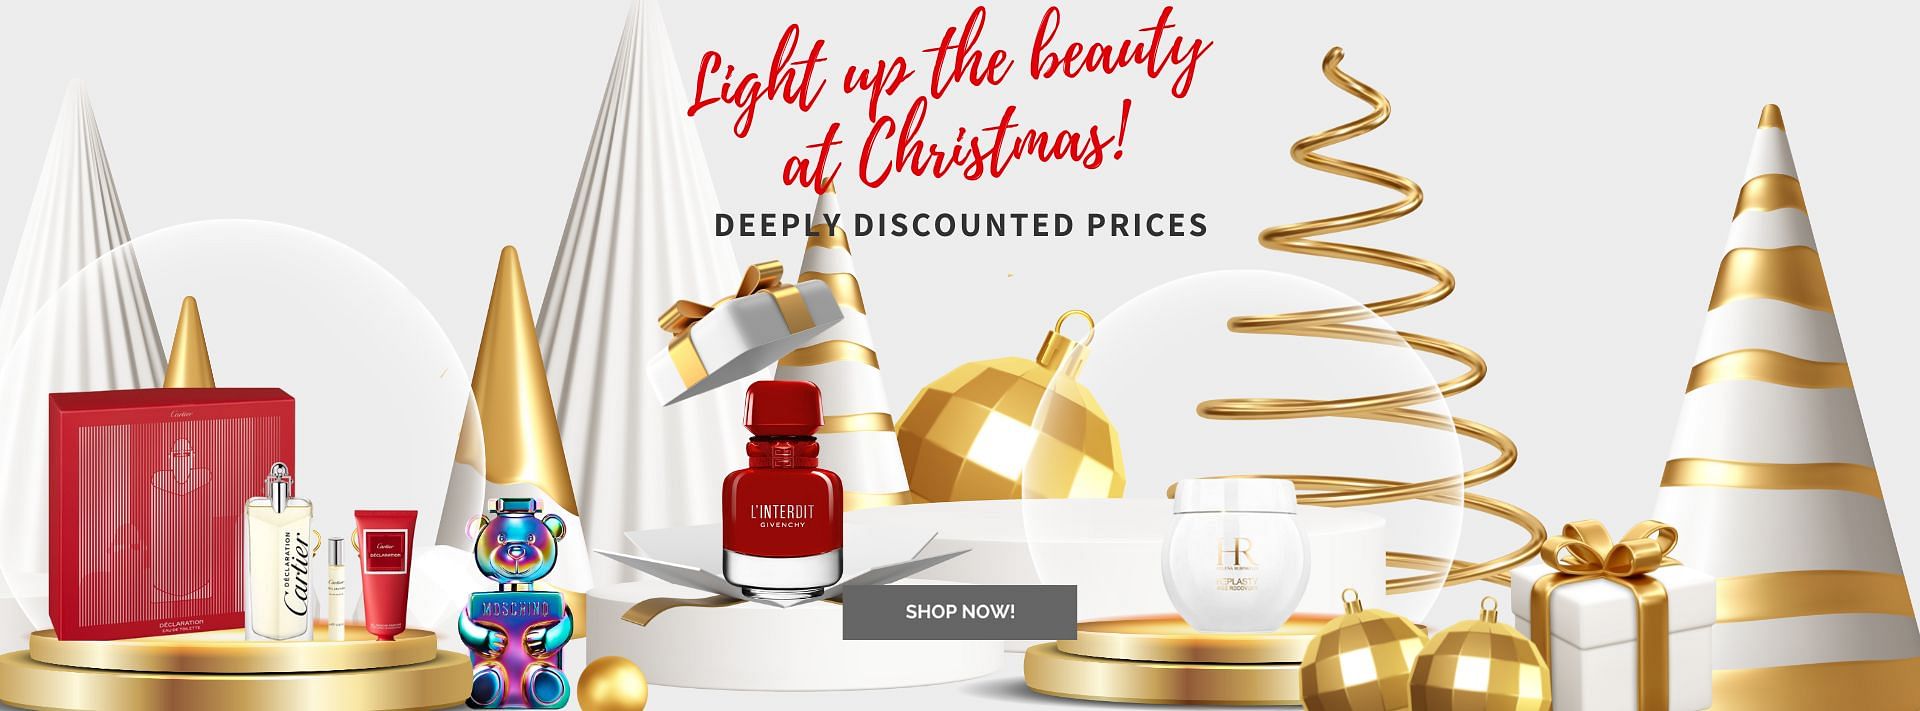 Light Up the Beauty at Christmas, at deeply discounted prices at Profumeria.com!